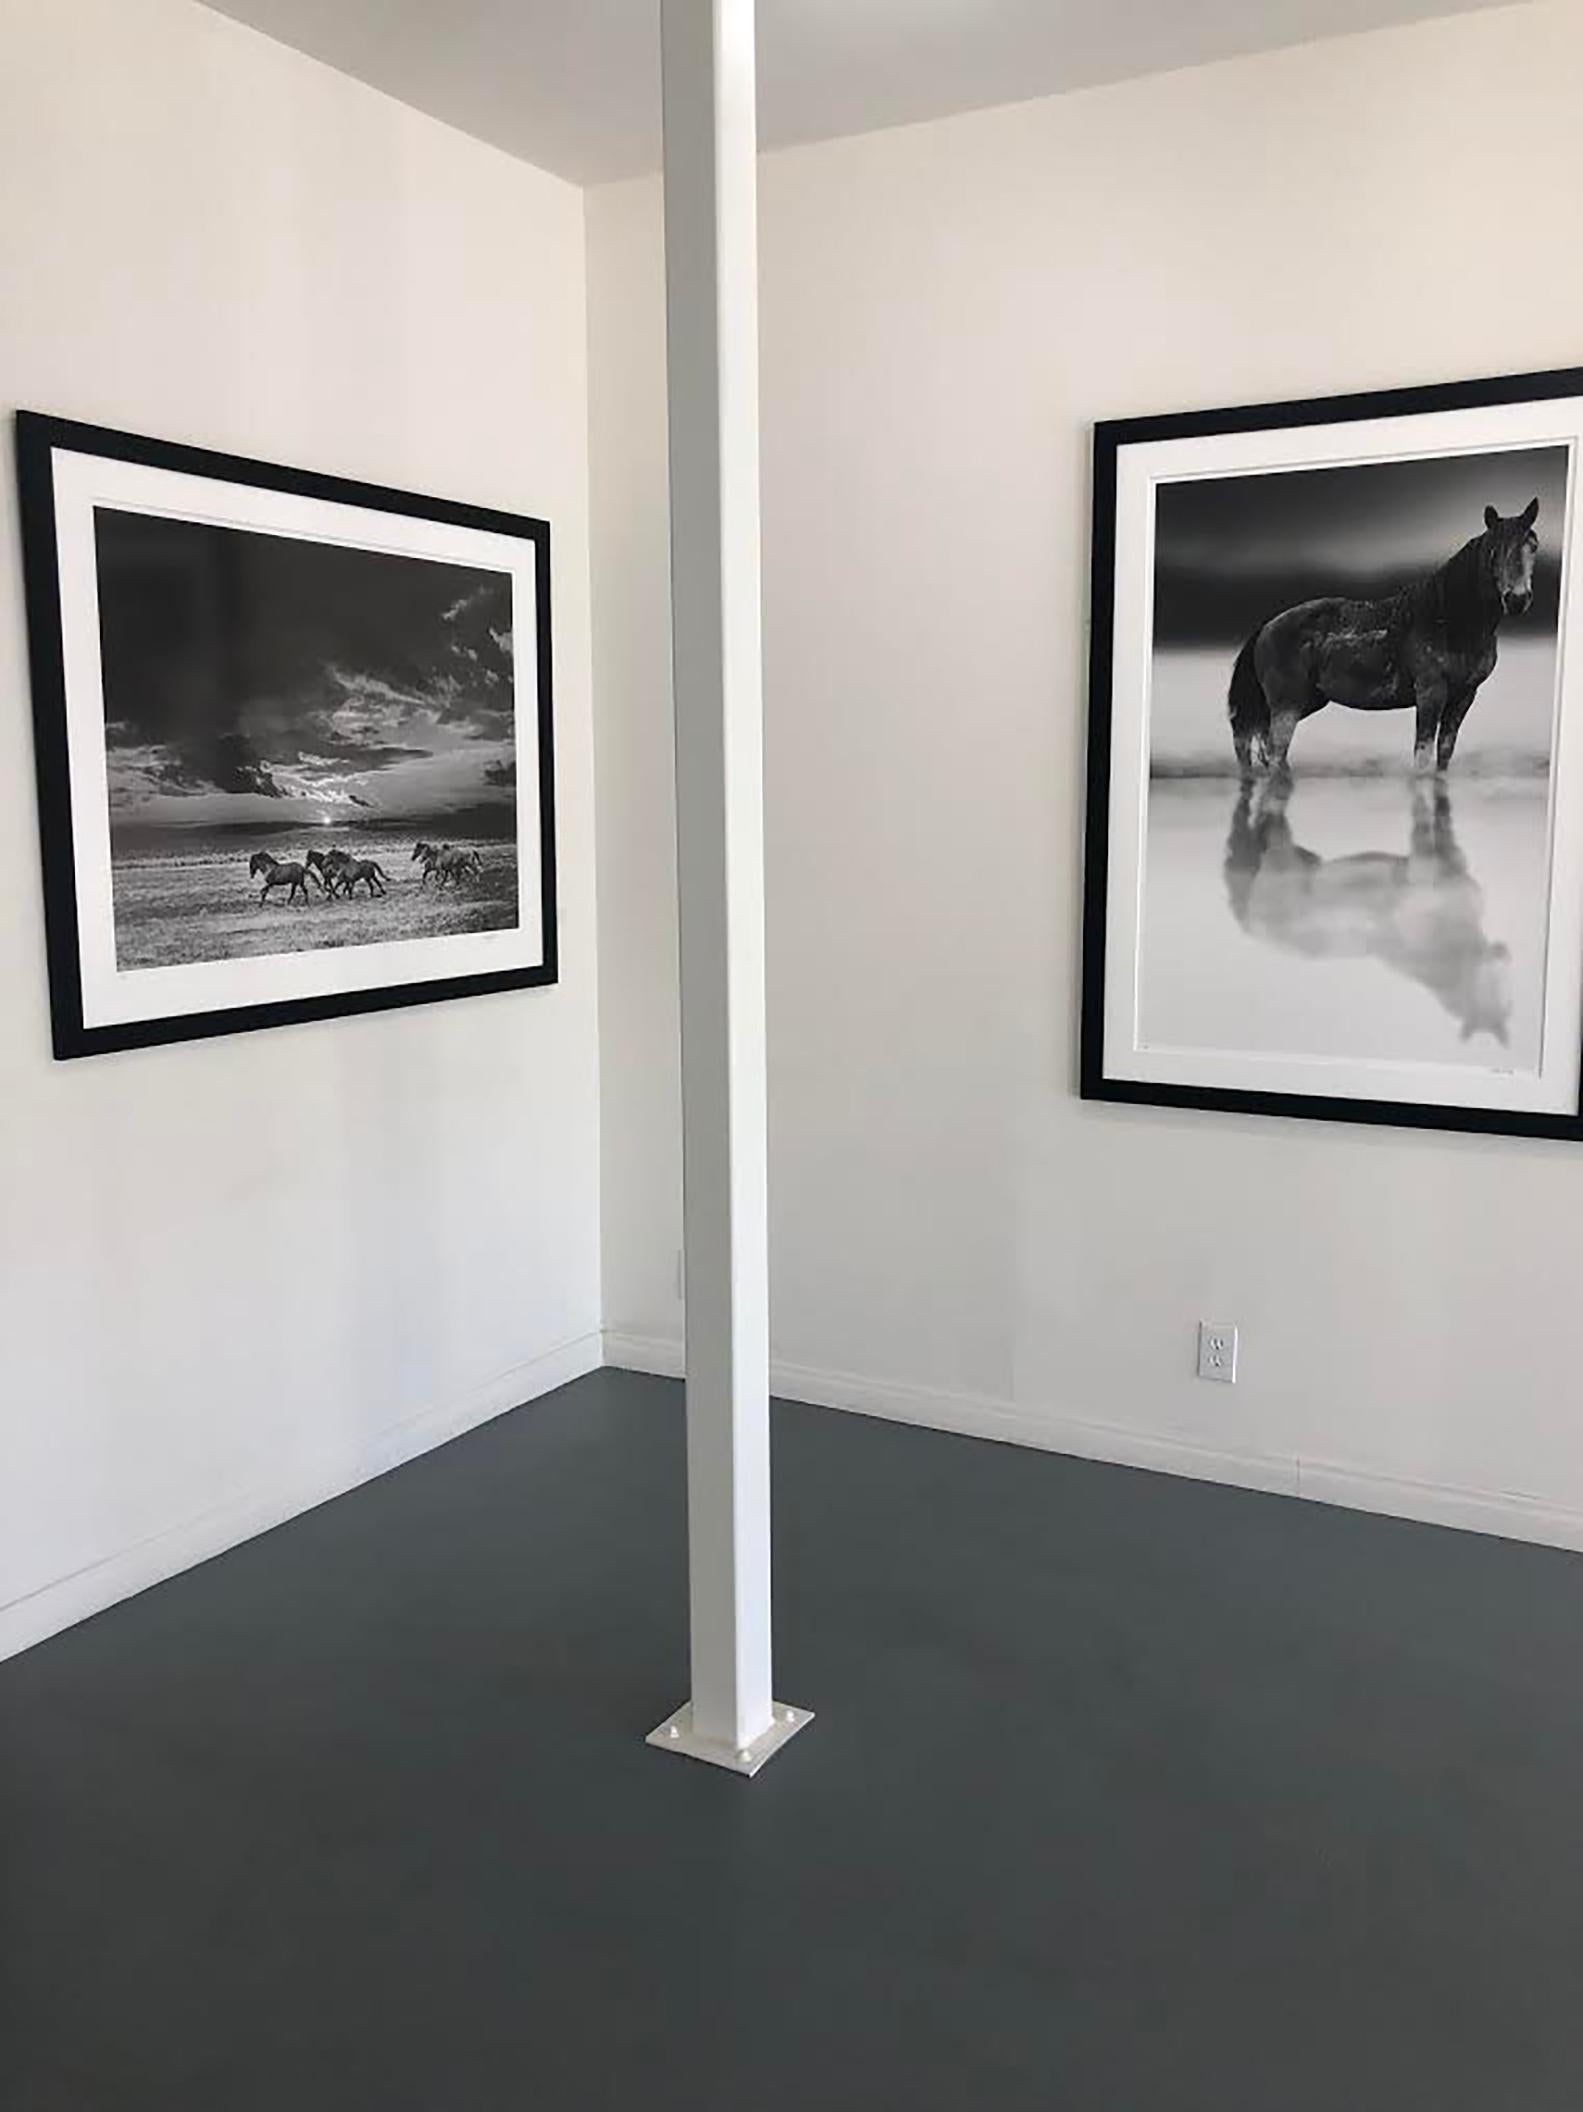 Black and White Photography of Wild Horses  Mustangs 36x48 - Print by Shane Russeck